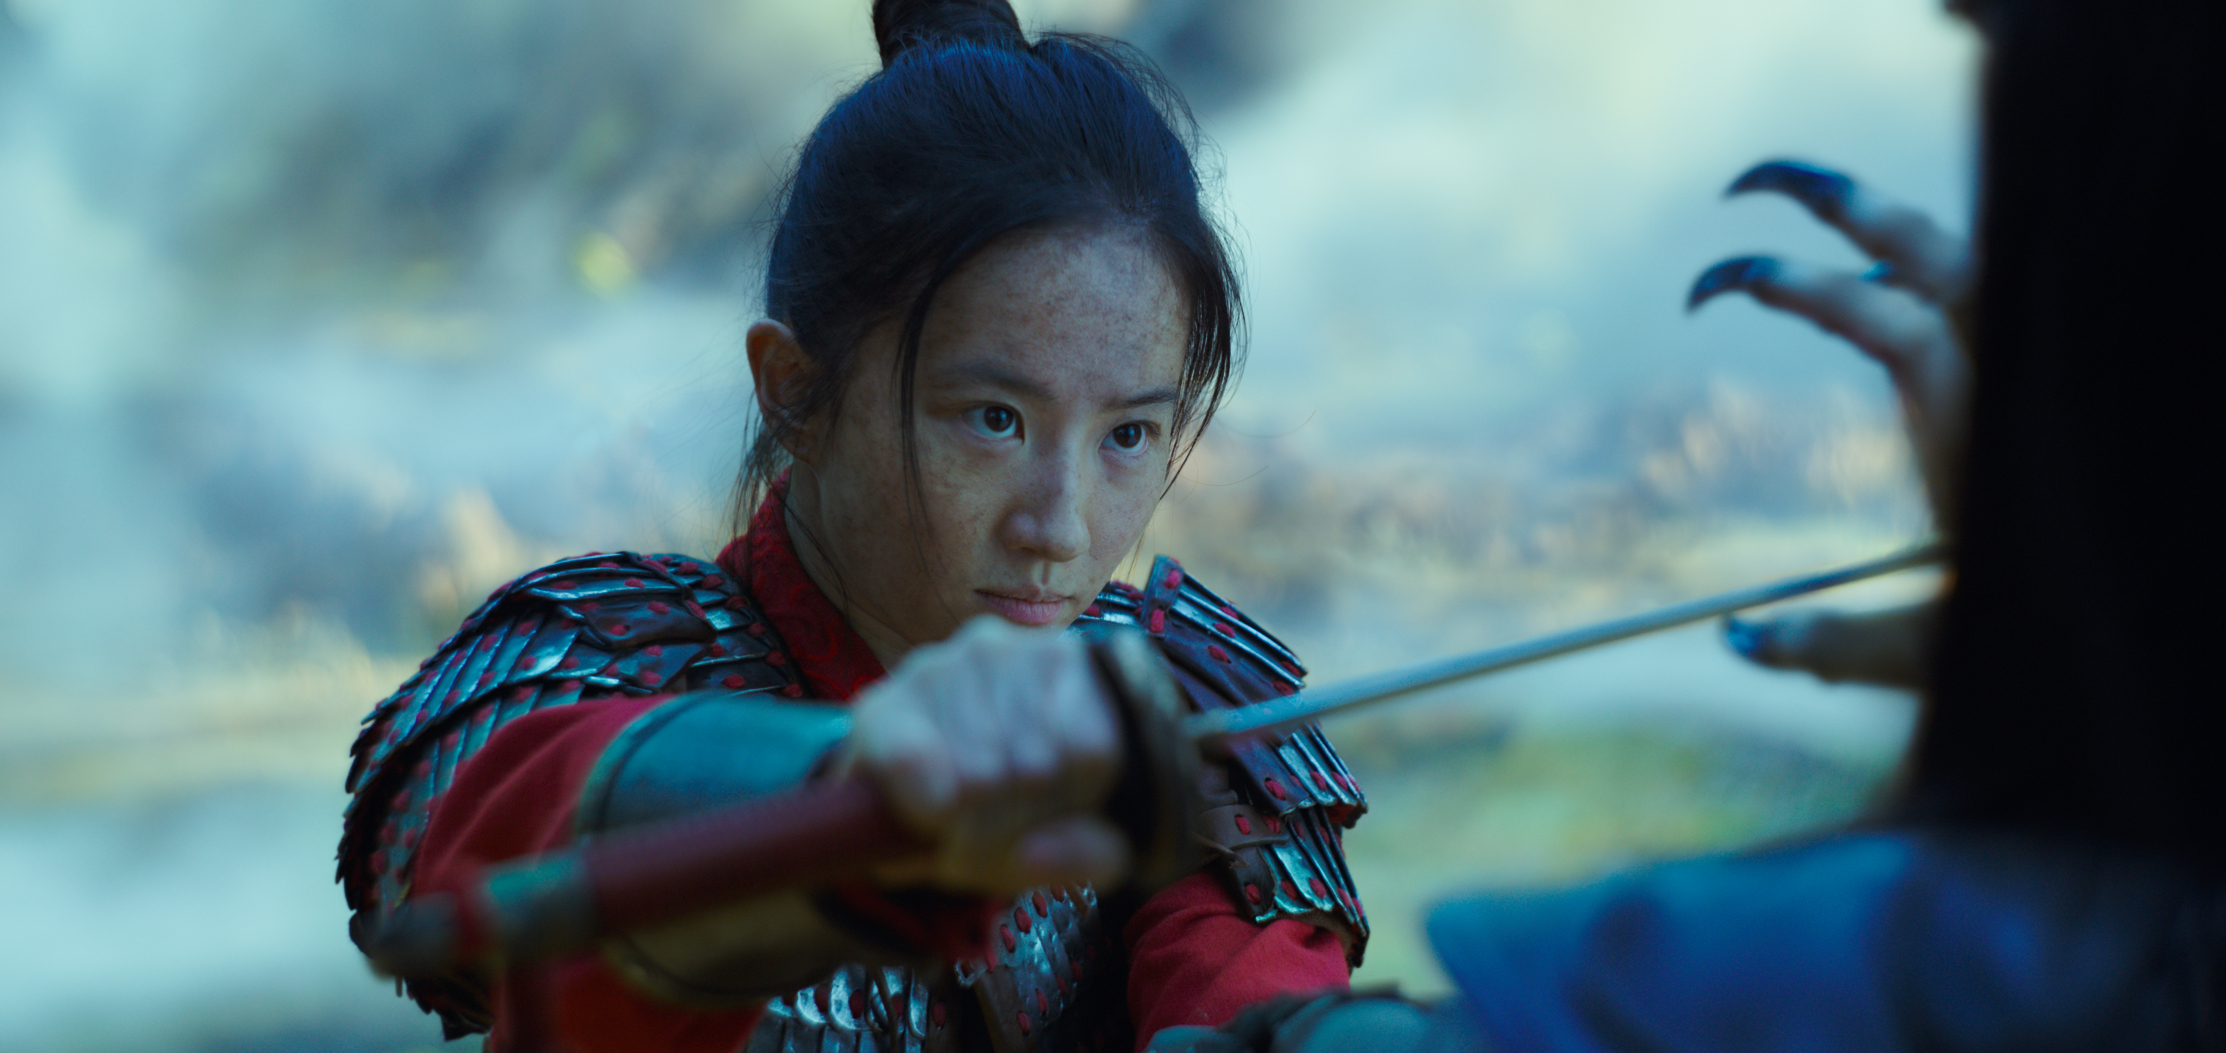 Trailer and Poster Released for Live-Action "Mulan" Coming ...